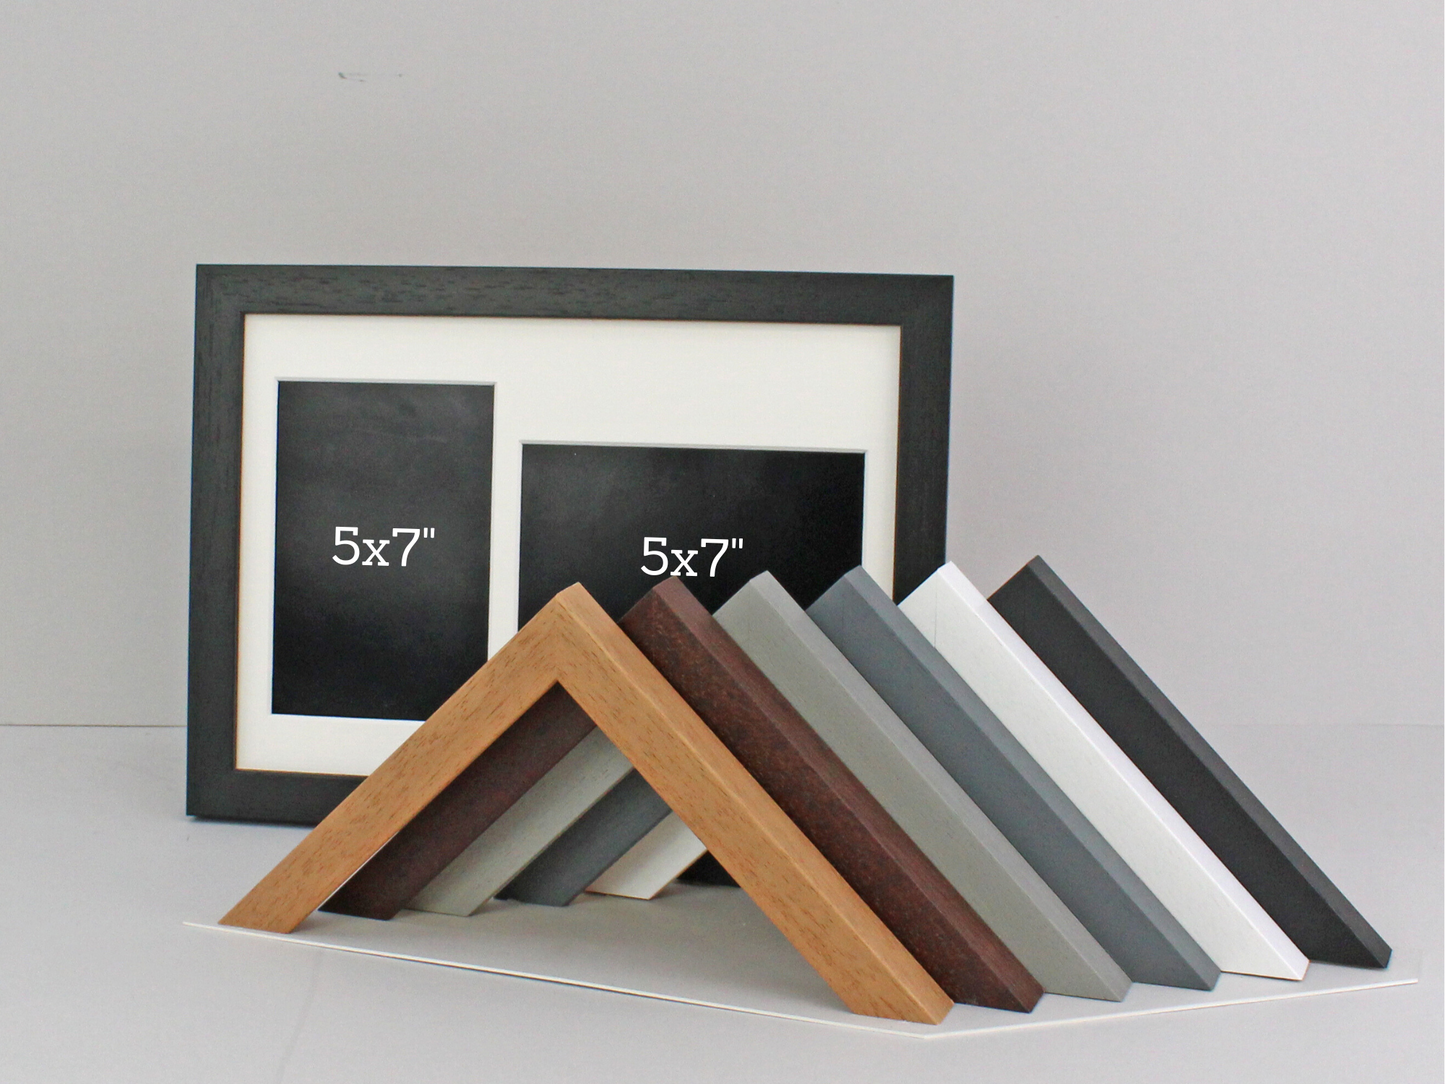 Suits Two 5x7" Photos; One Portrait and One Landscape. 11x14" Frame. Wooden Multi Aperture Photo Frame. - PhotoFramesandMore - Wooden Picture Frames